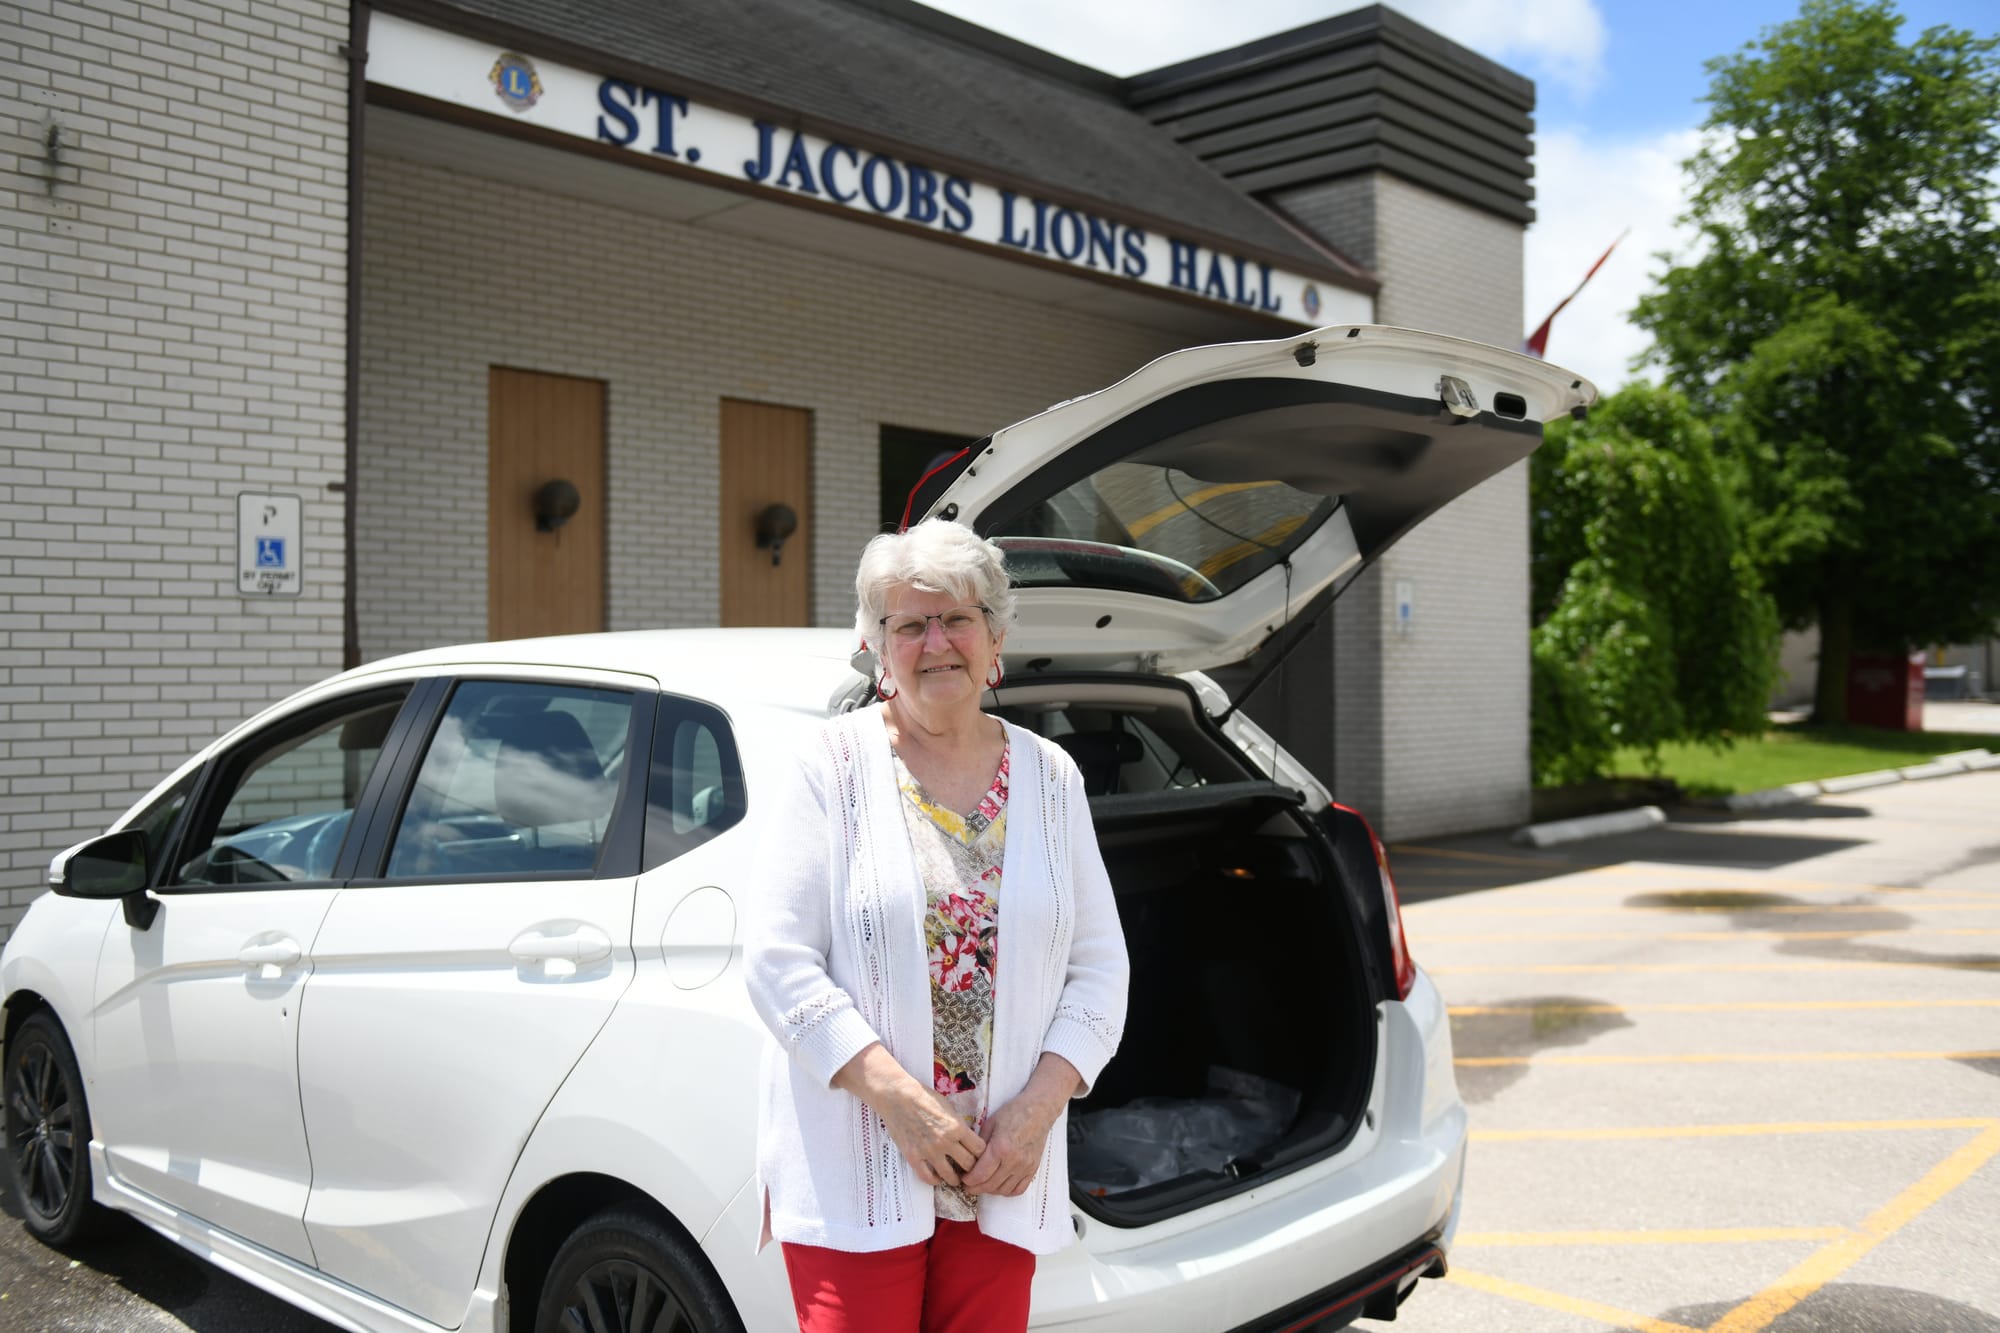                      St. Jacobs Lions to hold trunk sale as part of community garage sale                             
                     